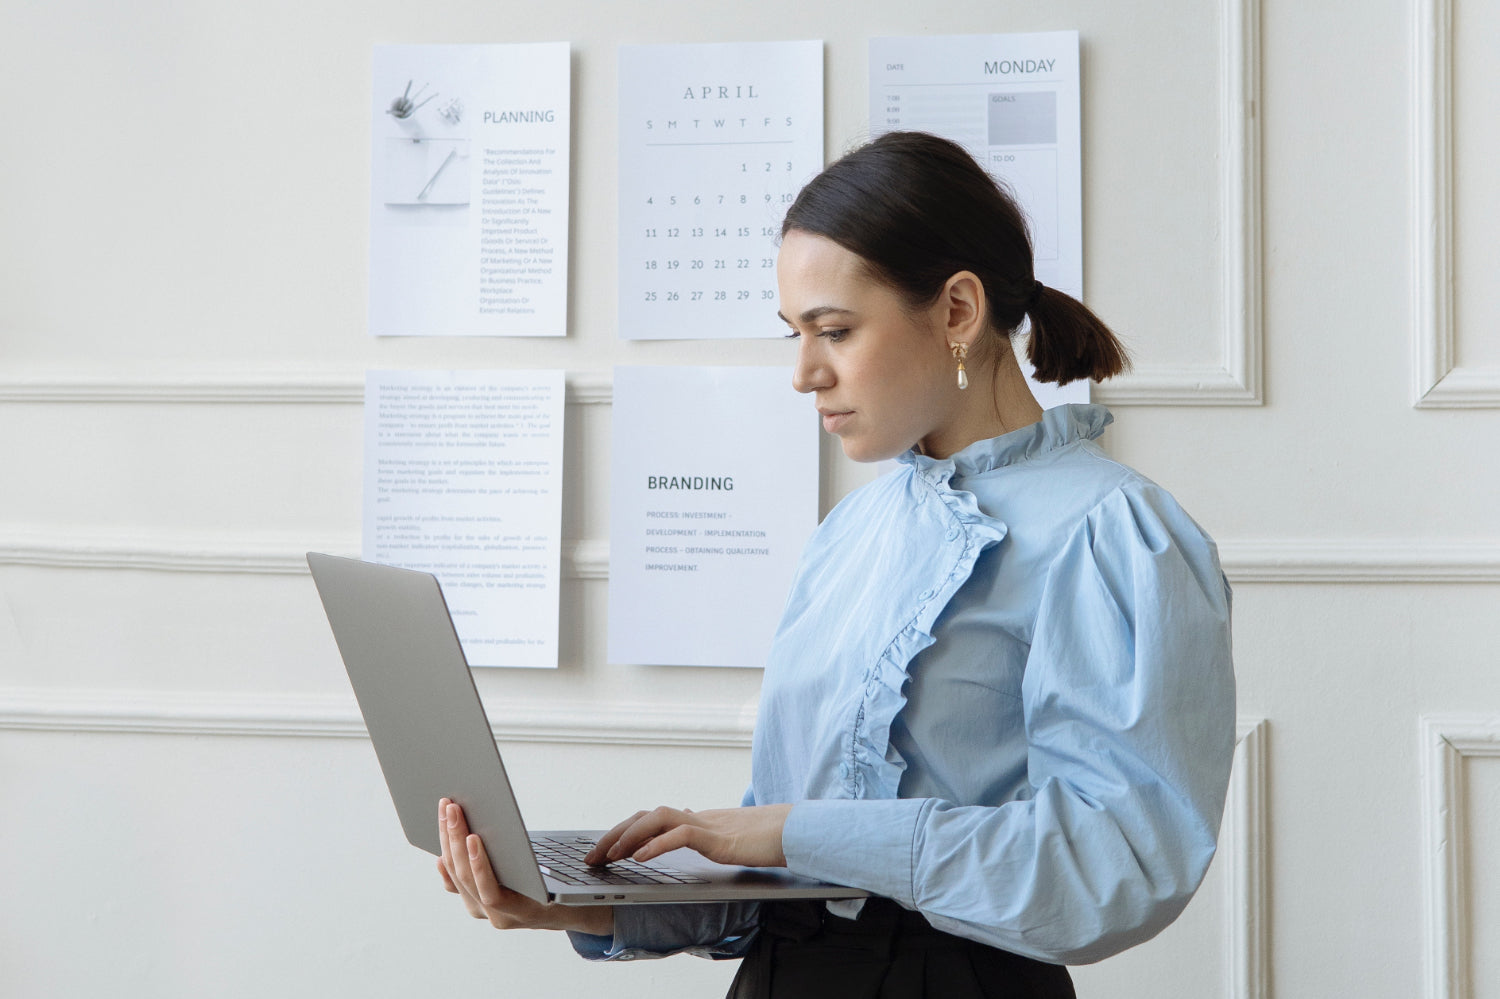 A woman looks at a laptop against a wall covered in business plan documents